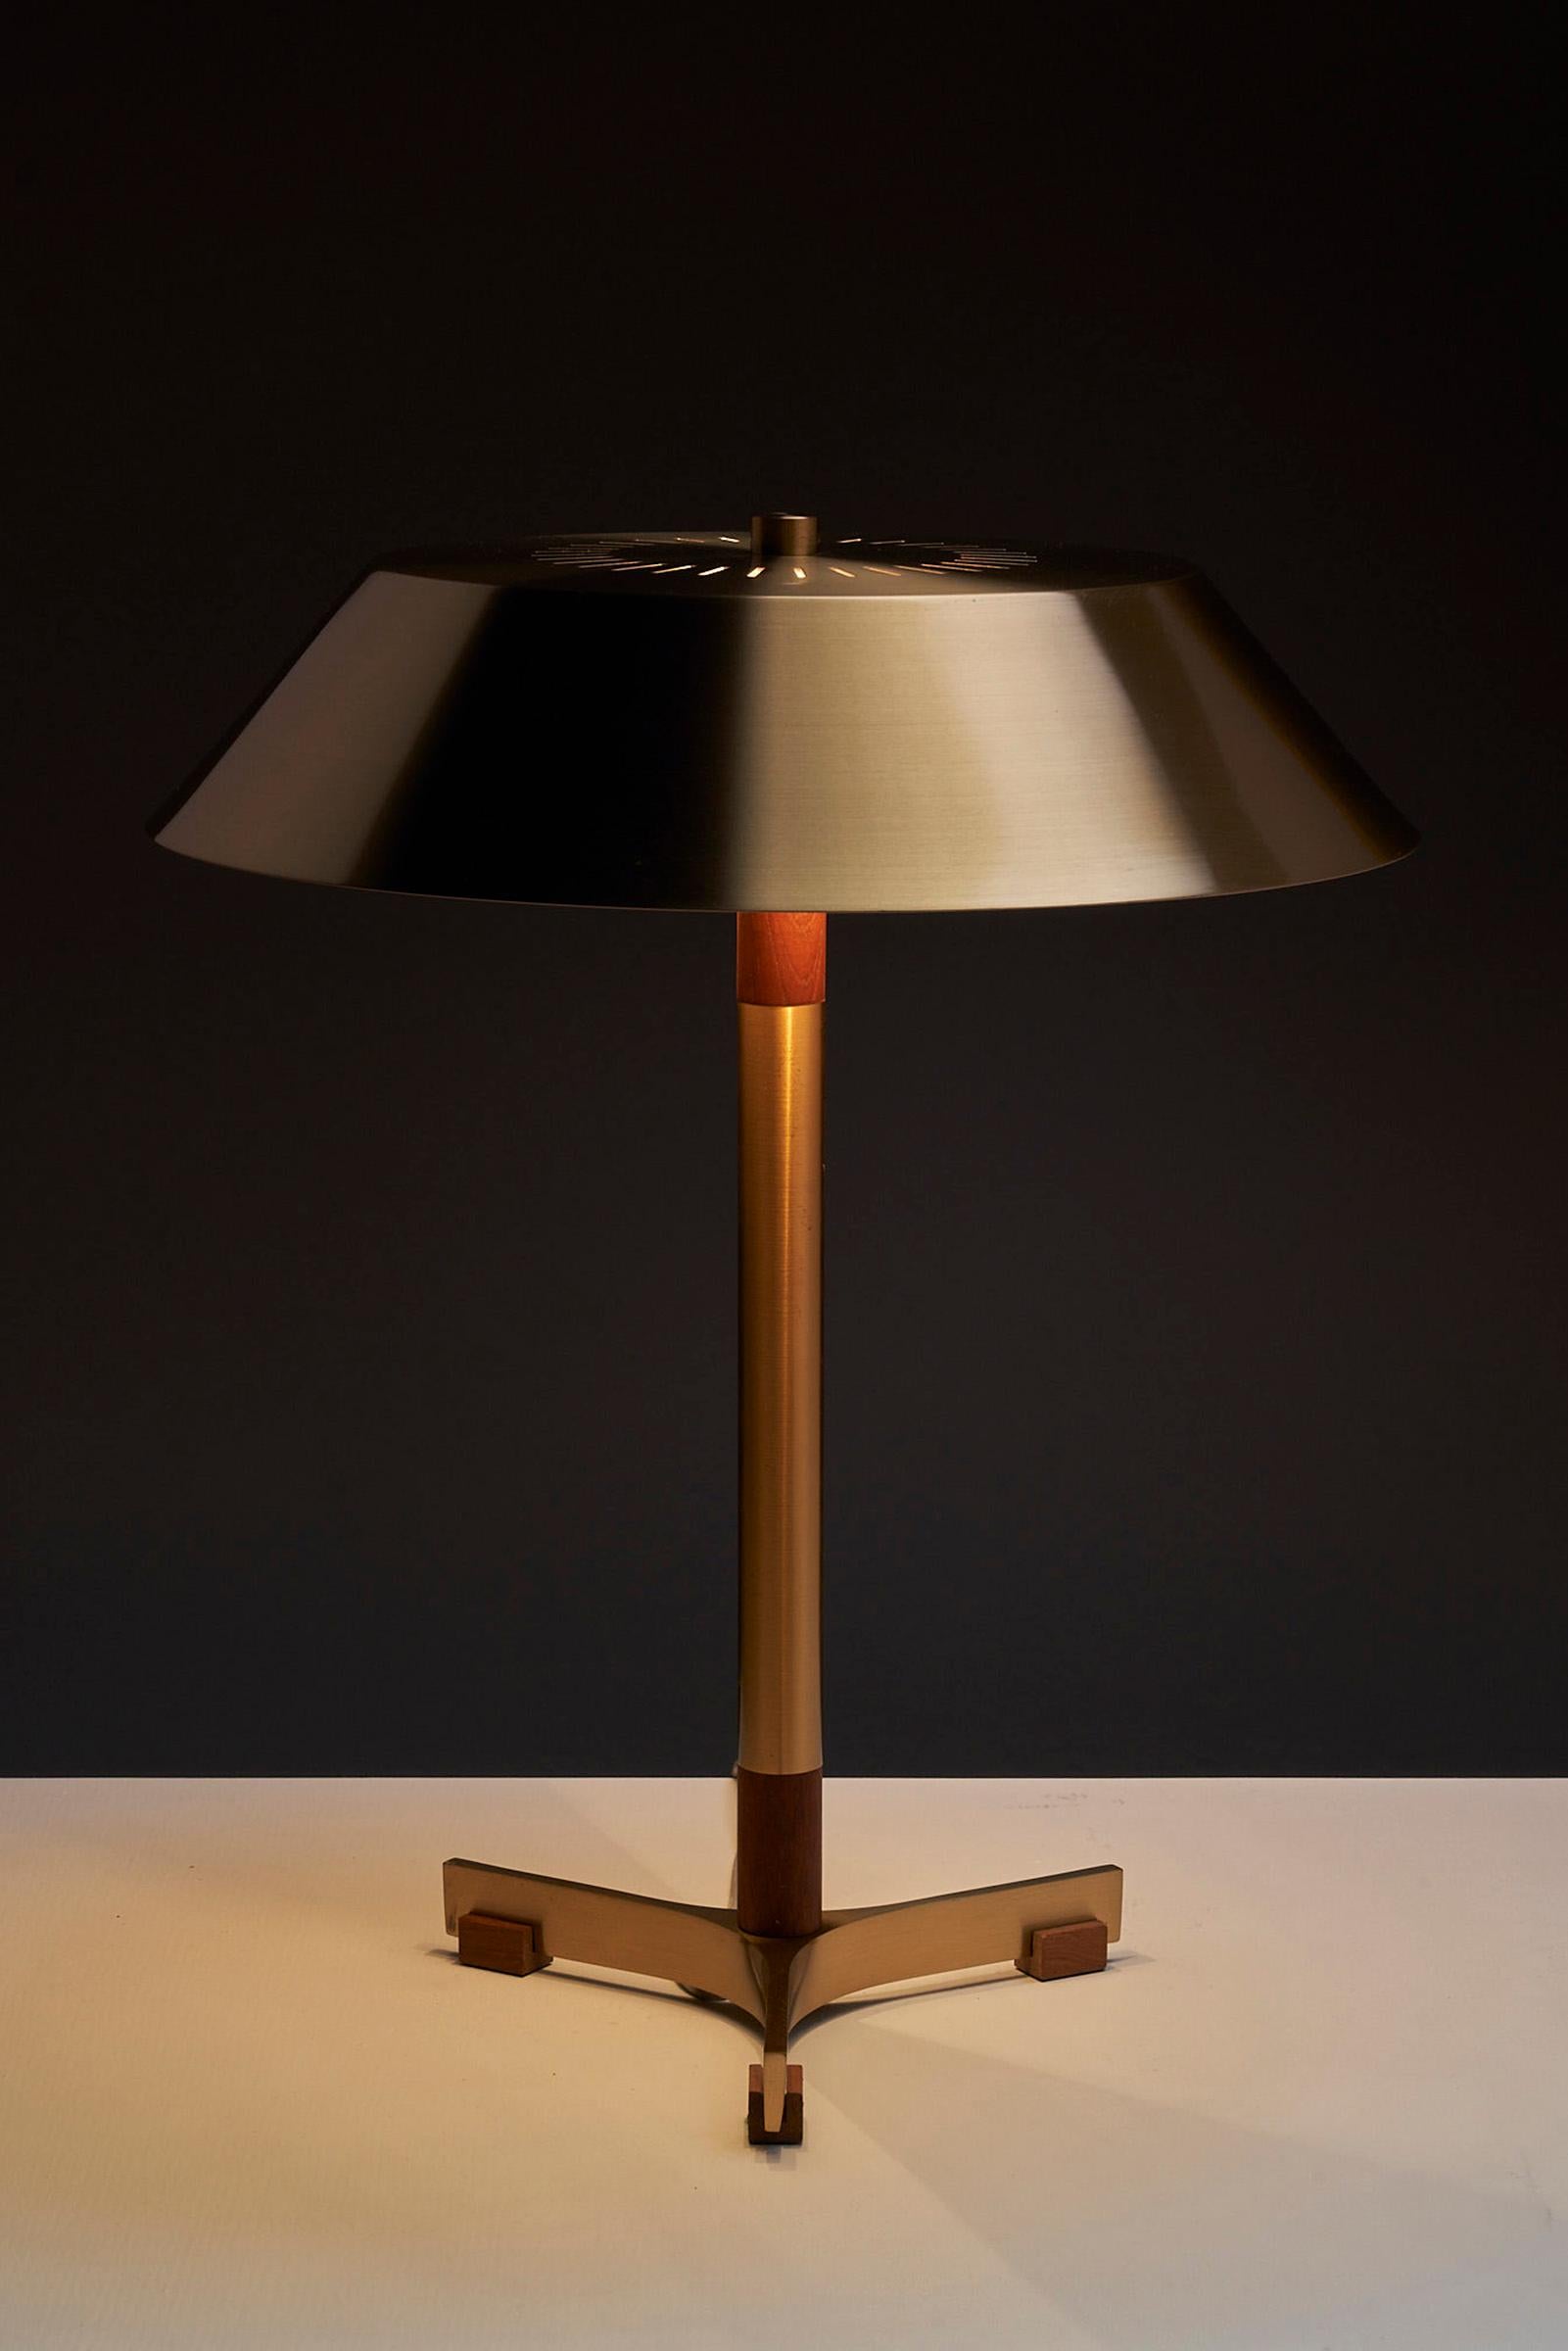 Presenting the epitome of Danish design from the 1960s, the 'President' lamp designed by Jo Hammerborg for Fog & Mørup is a true gem that exudes timeless elegance. Crafted with meticulous attention to detail, this lamp showcases the perfect blend of